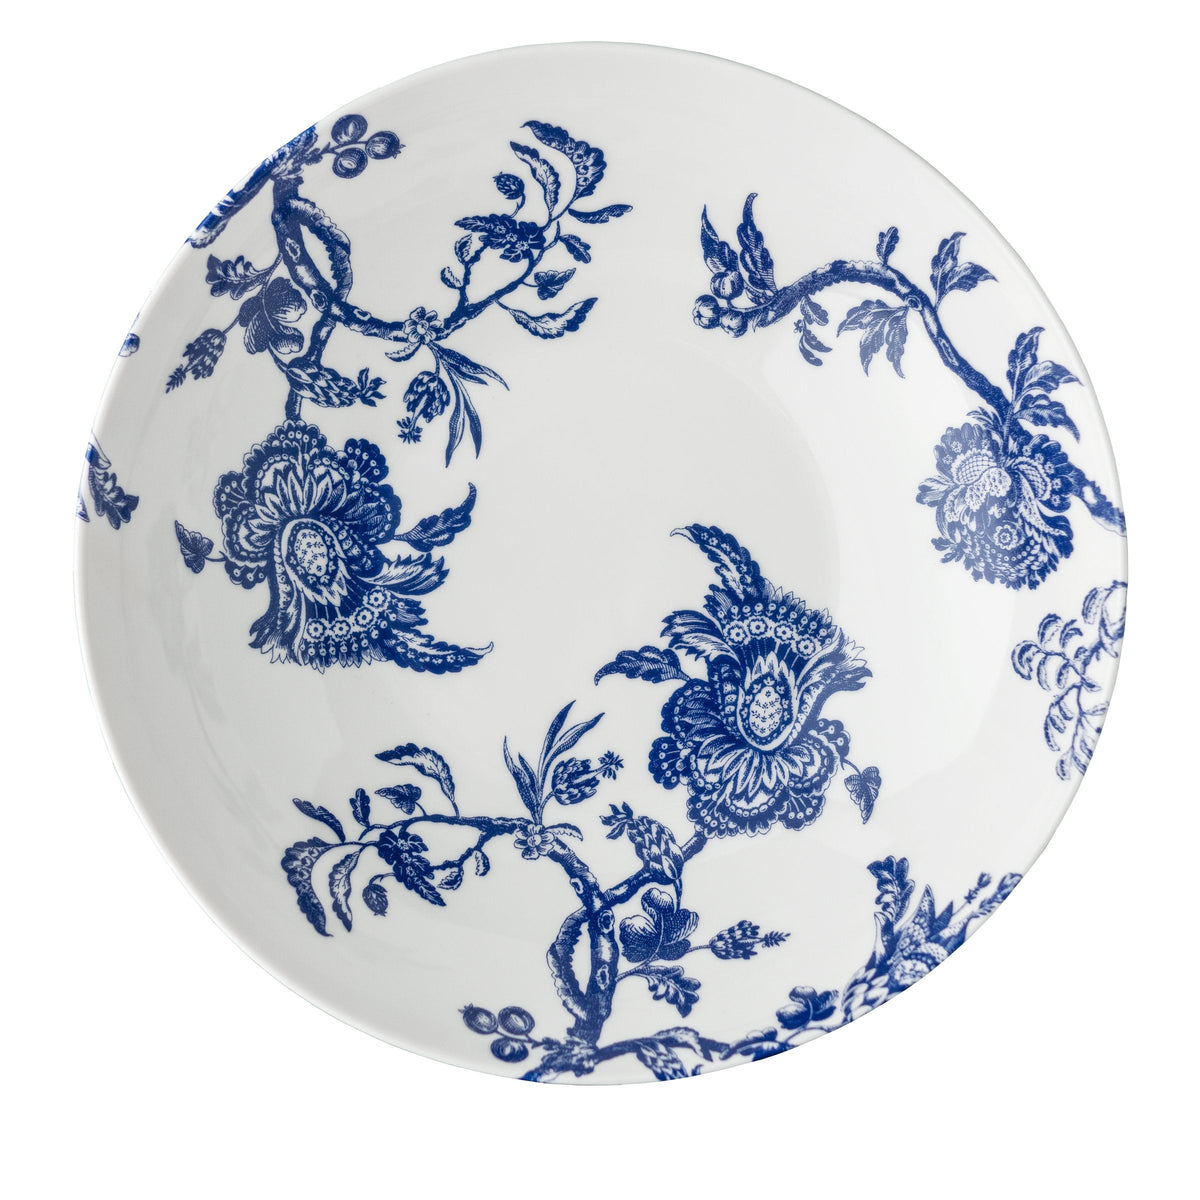 An Arcadia Wide Serving Bowl featuring a blue and white floral pattern from Caskata Artisanal Home.